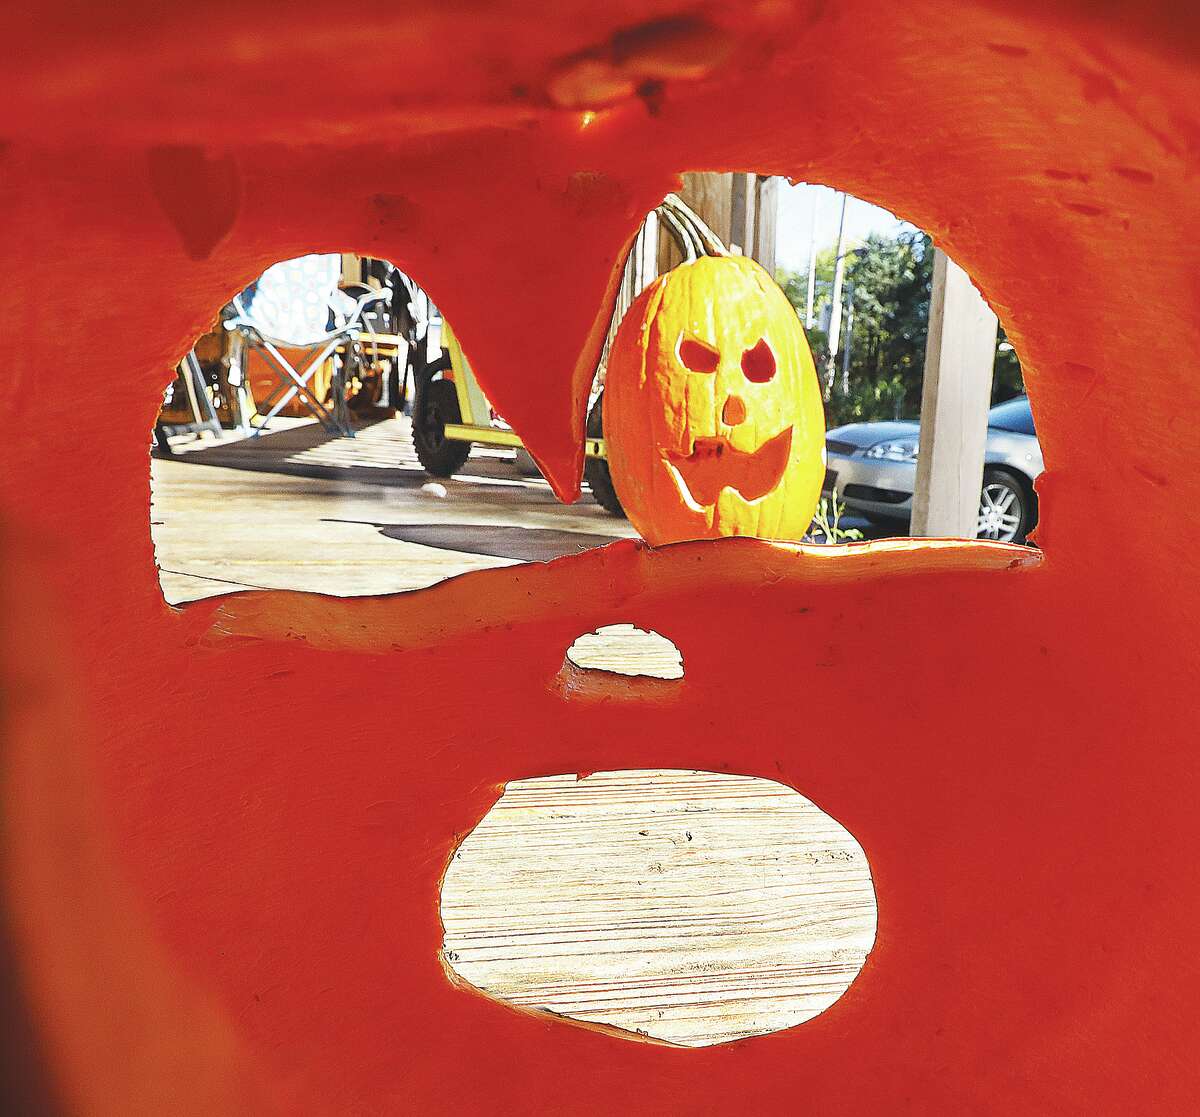 John Badman|The Telegraph Hand-carved pumpkins are turning into jack-o-lanterns all over the area as Halloween, a popular time of year in Alton, gets into full swing with scary decorations in yards everywhere. A view from inside a carved pumpkin in the 2800 block of Brown Street in Alton looks toward another creation on the same porch. The days are counting down to Halloween and its parades, including the large one in Alton at 7 p.m. on Monday, Oct. 31.